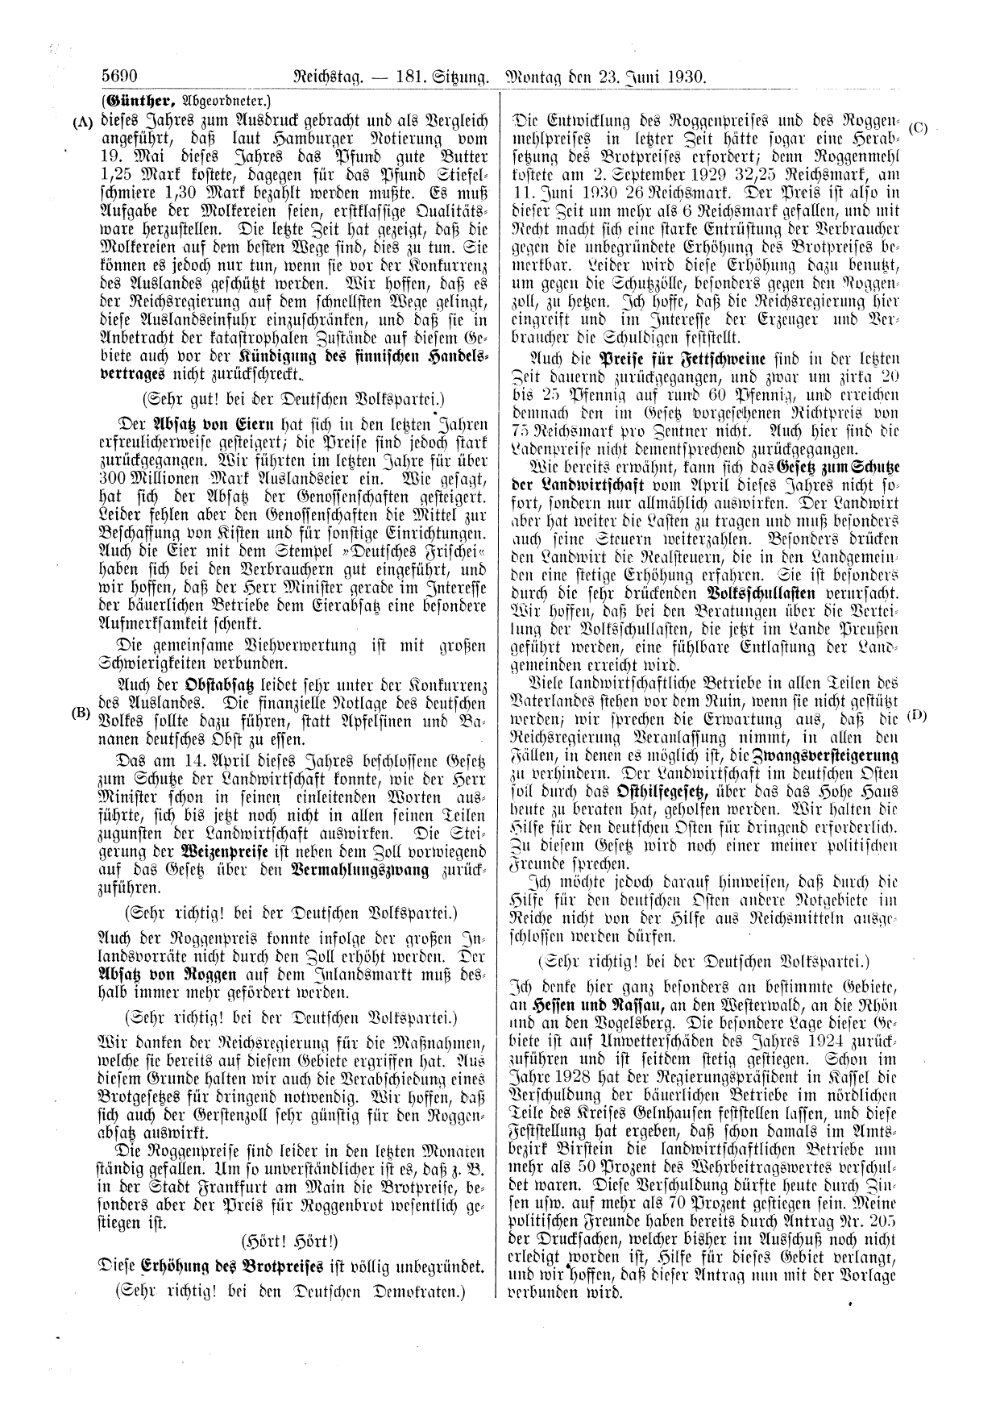 Scan of page 5690